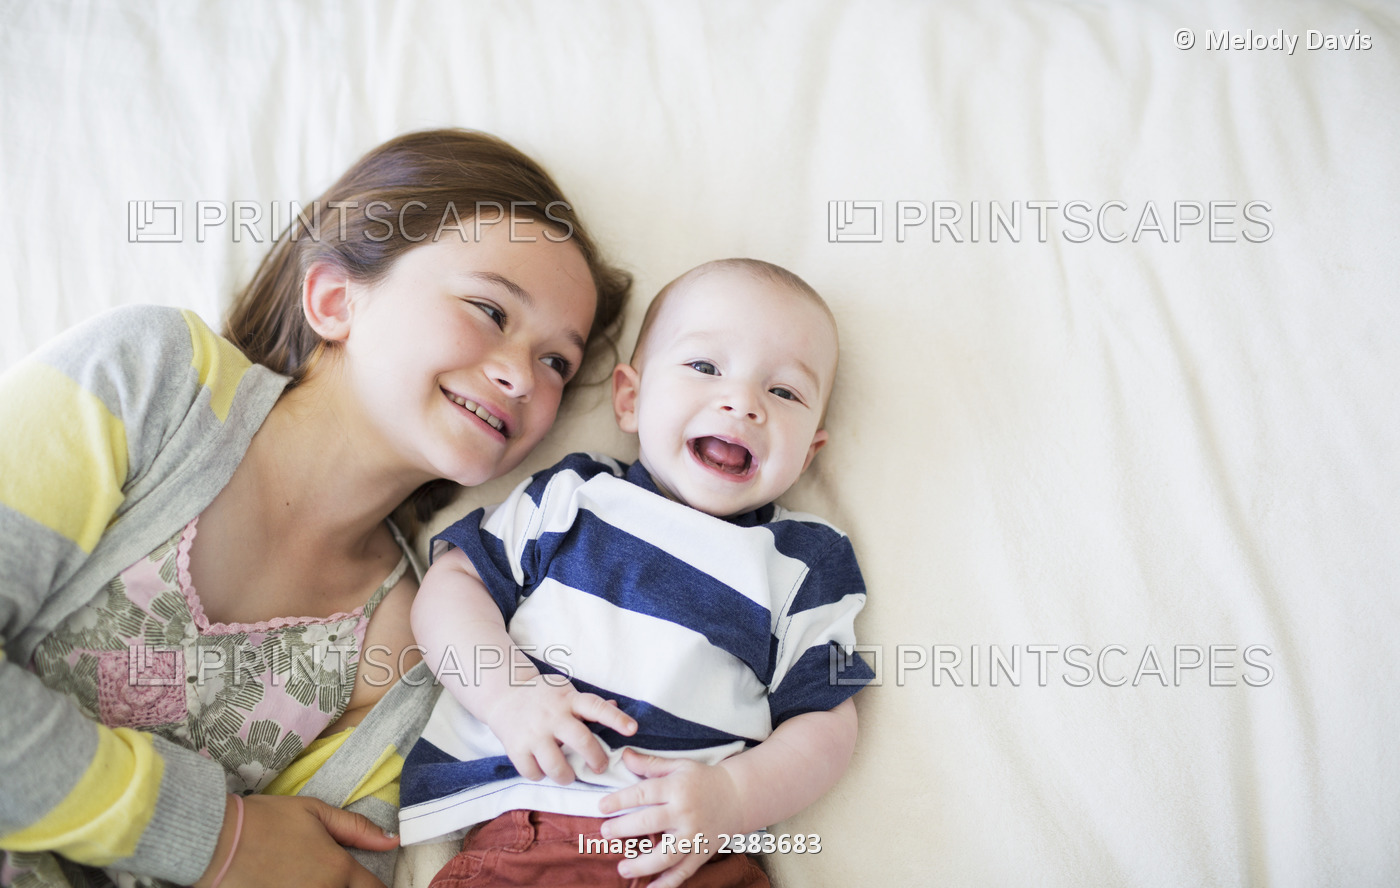 Portrait Of A Sister With Her Baby Brother; Victoria, British Columbia, Canada